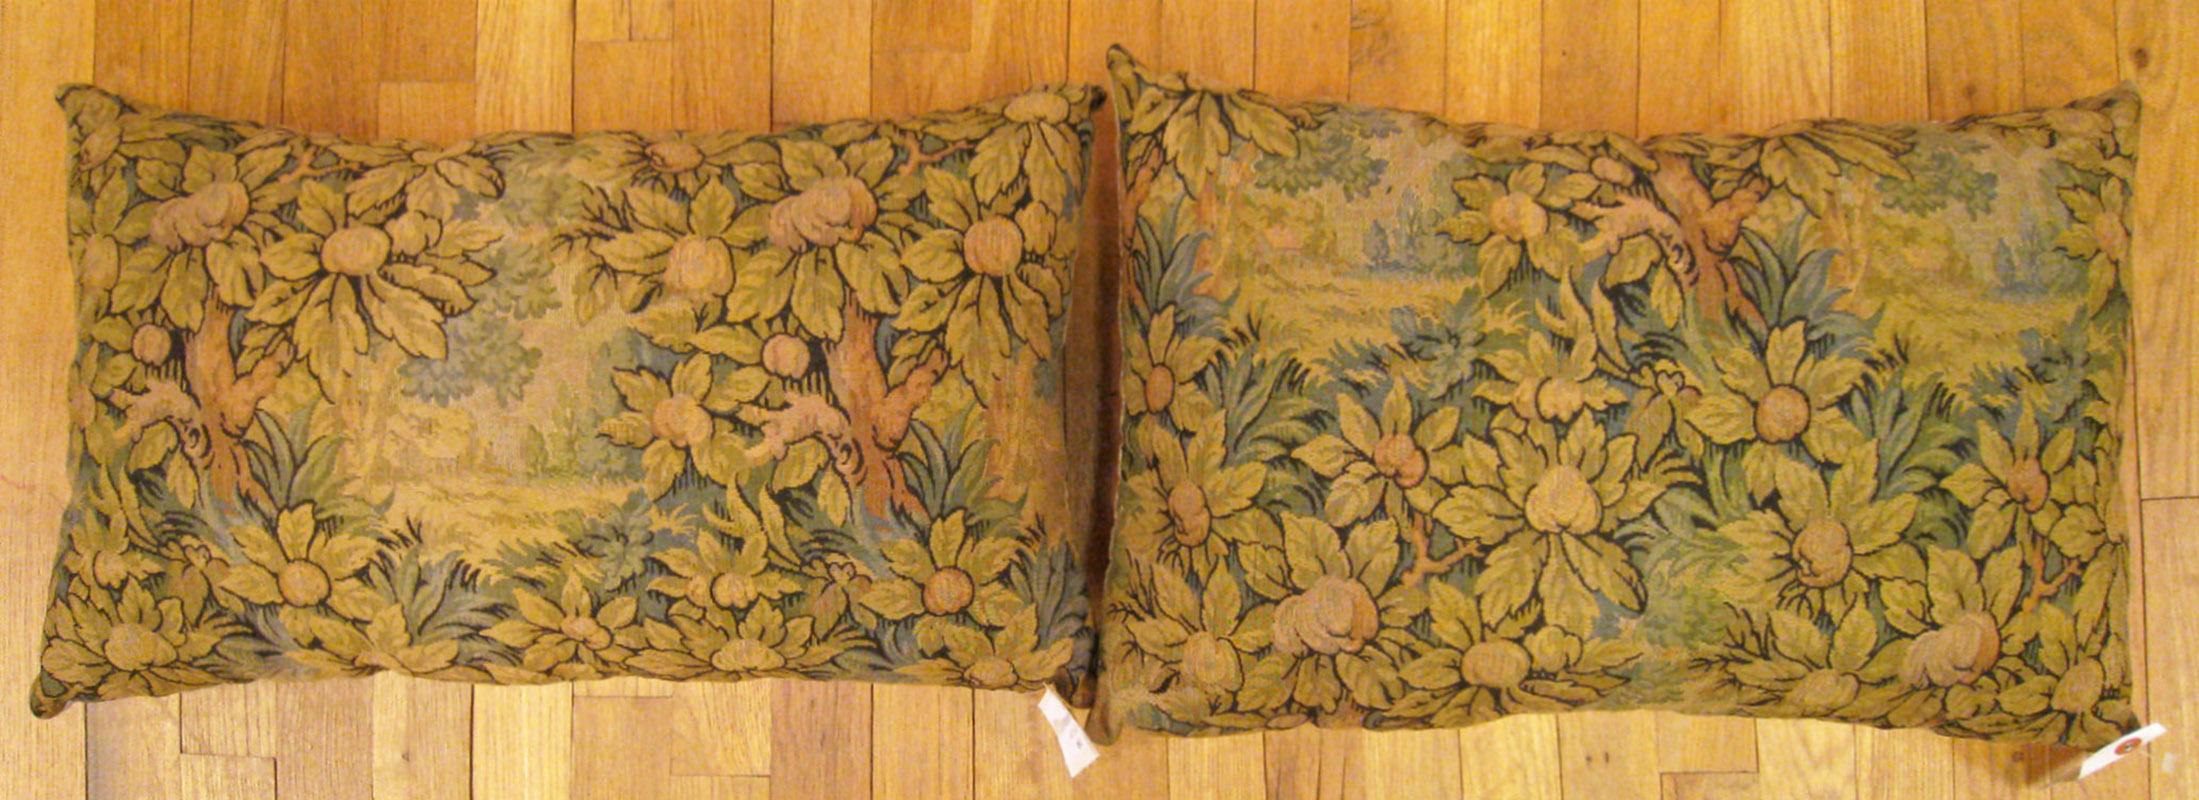 A pair of antique jacquard tapestry pillows; size 1'2” x 2'0” each.

An antique decorative pillows with trees allover a green central field, size 1'2